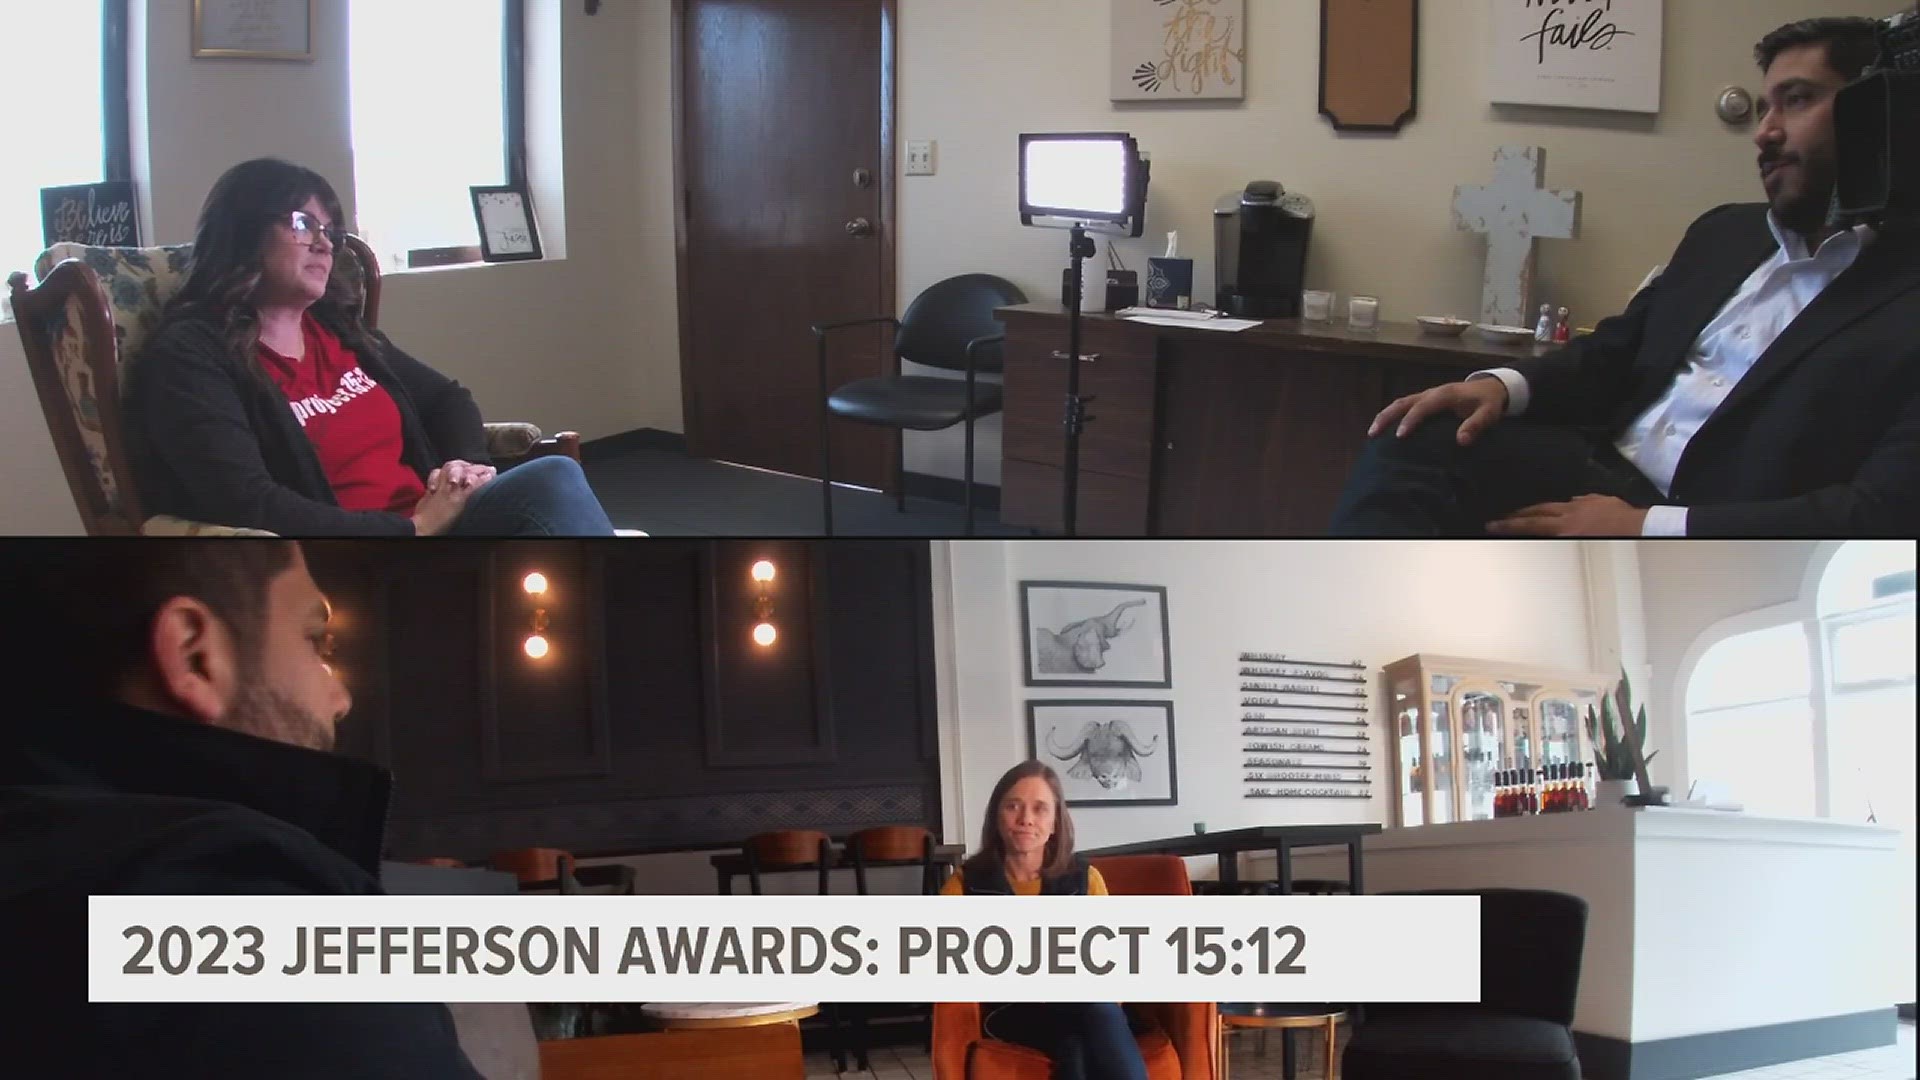 Project 15:12's mission is to "love others when life happens". See why they are being nominated for a Jefferson Award.